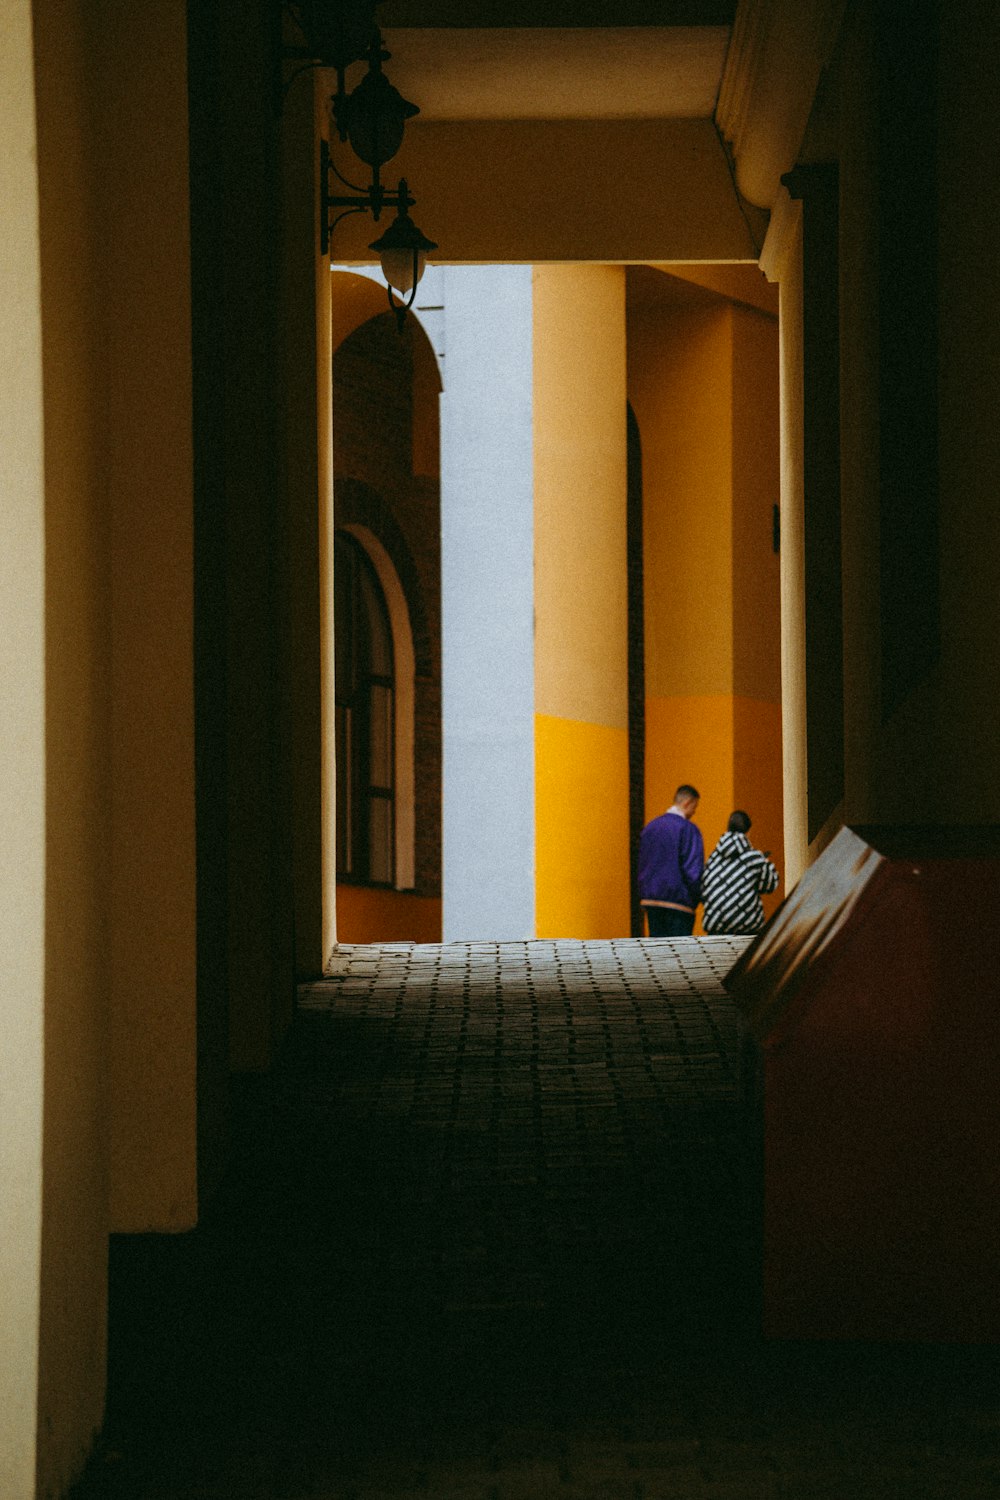 two people sitting on a bench in a hallway